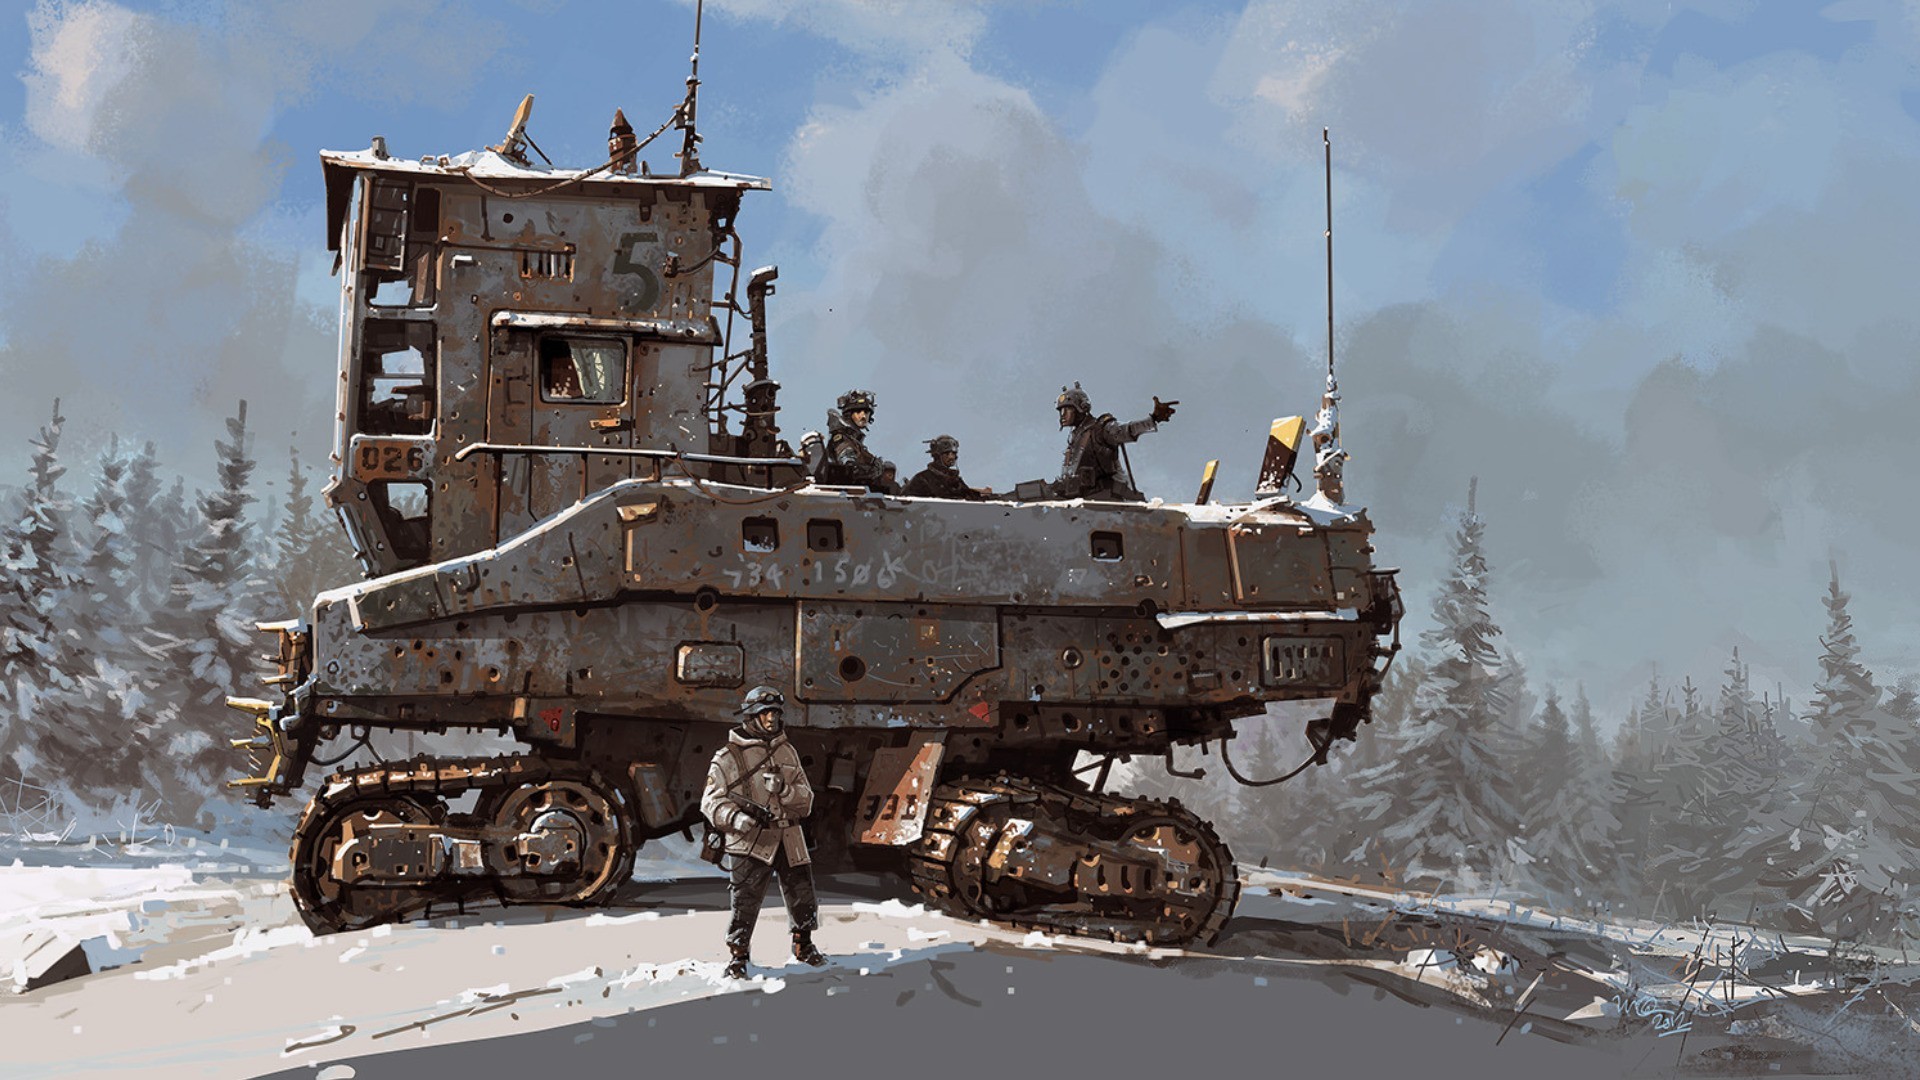 General 1920x1080 tank snow apocalyptic military vehicle military vehicle